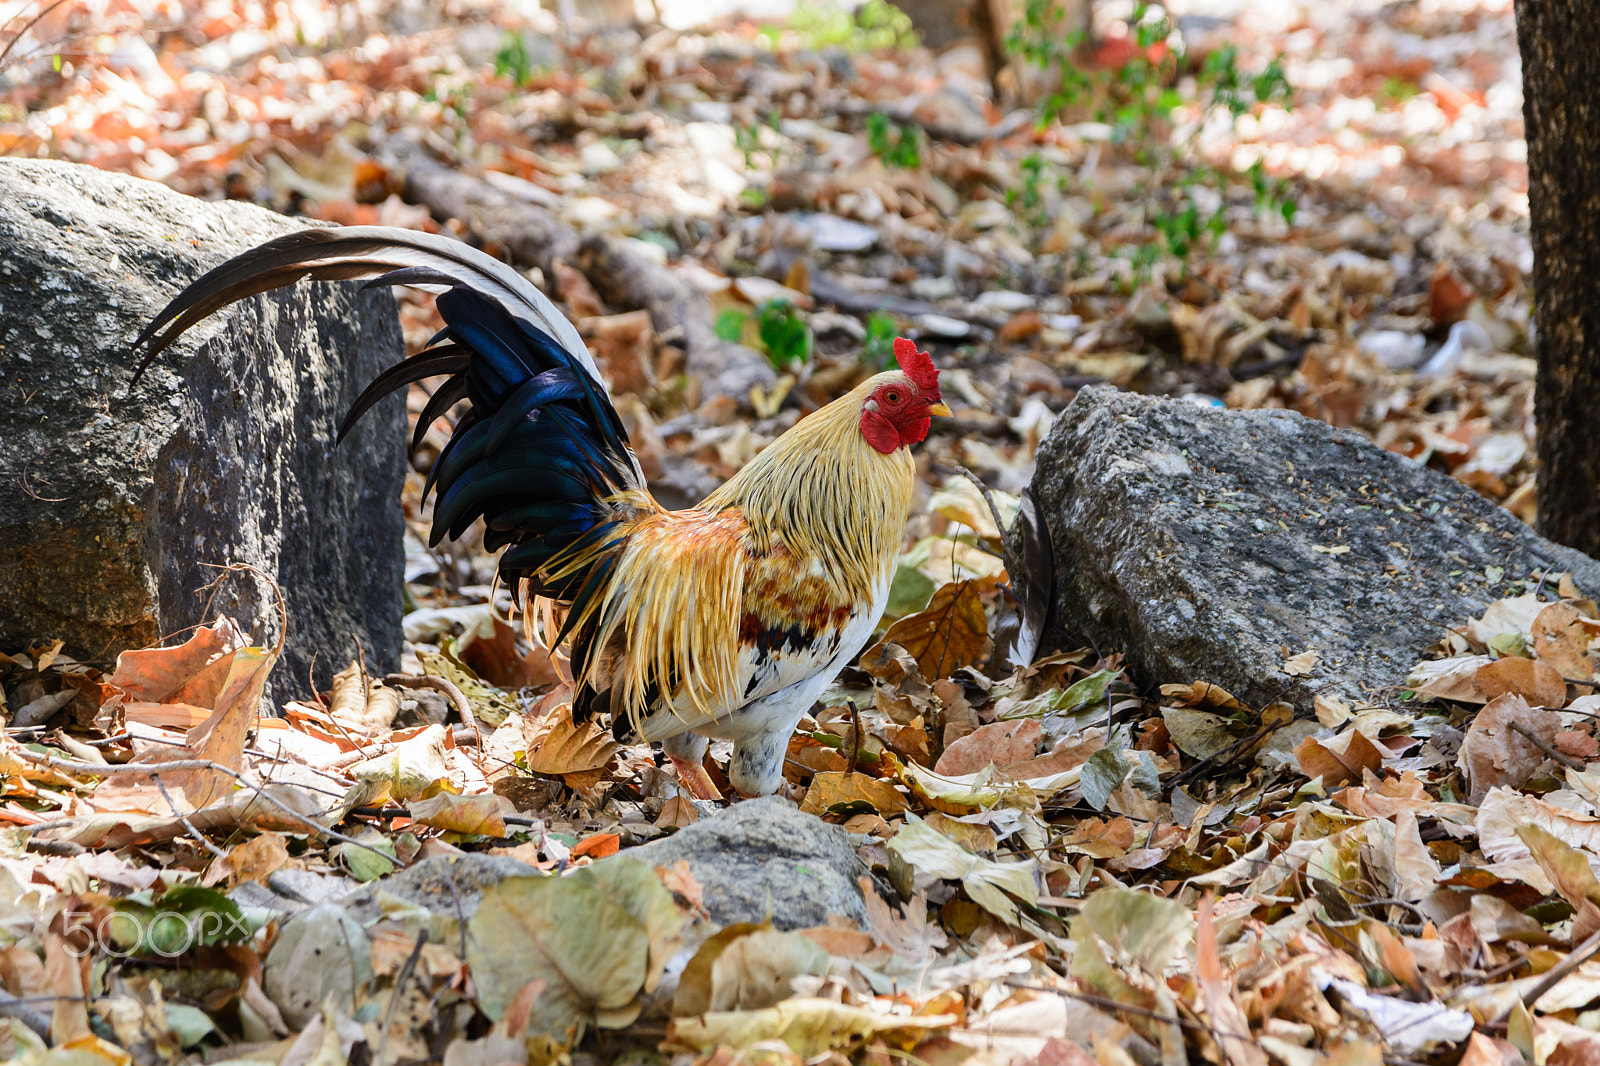 Nikon D5200 + Sigma 17-70mm F2.8-4 DC Macro OS HSM | C sample photo. Chicken feed, walk in nature. photography